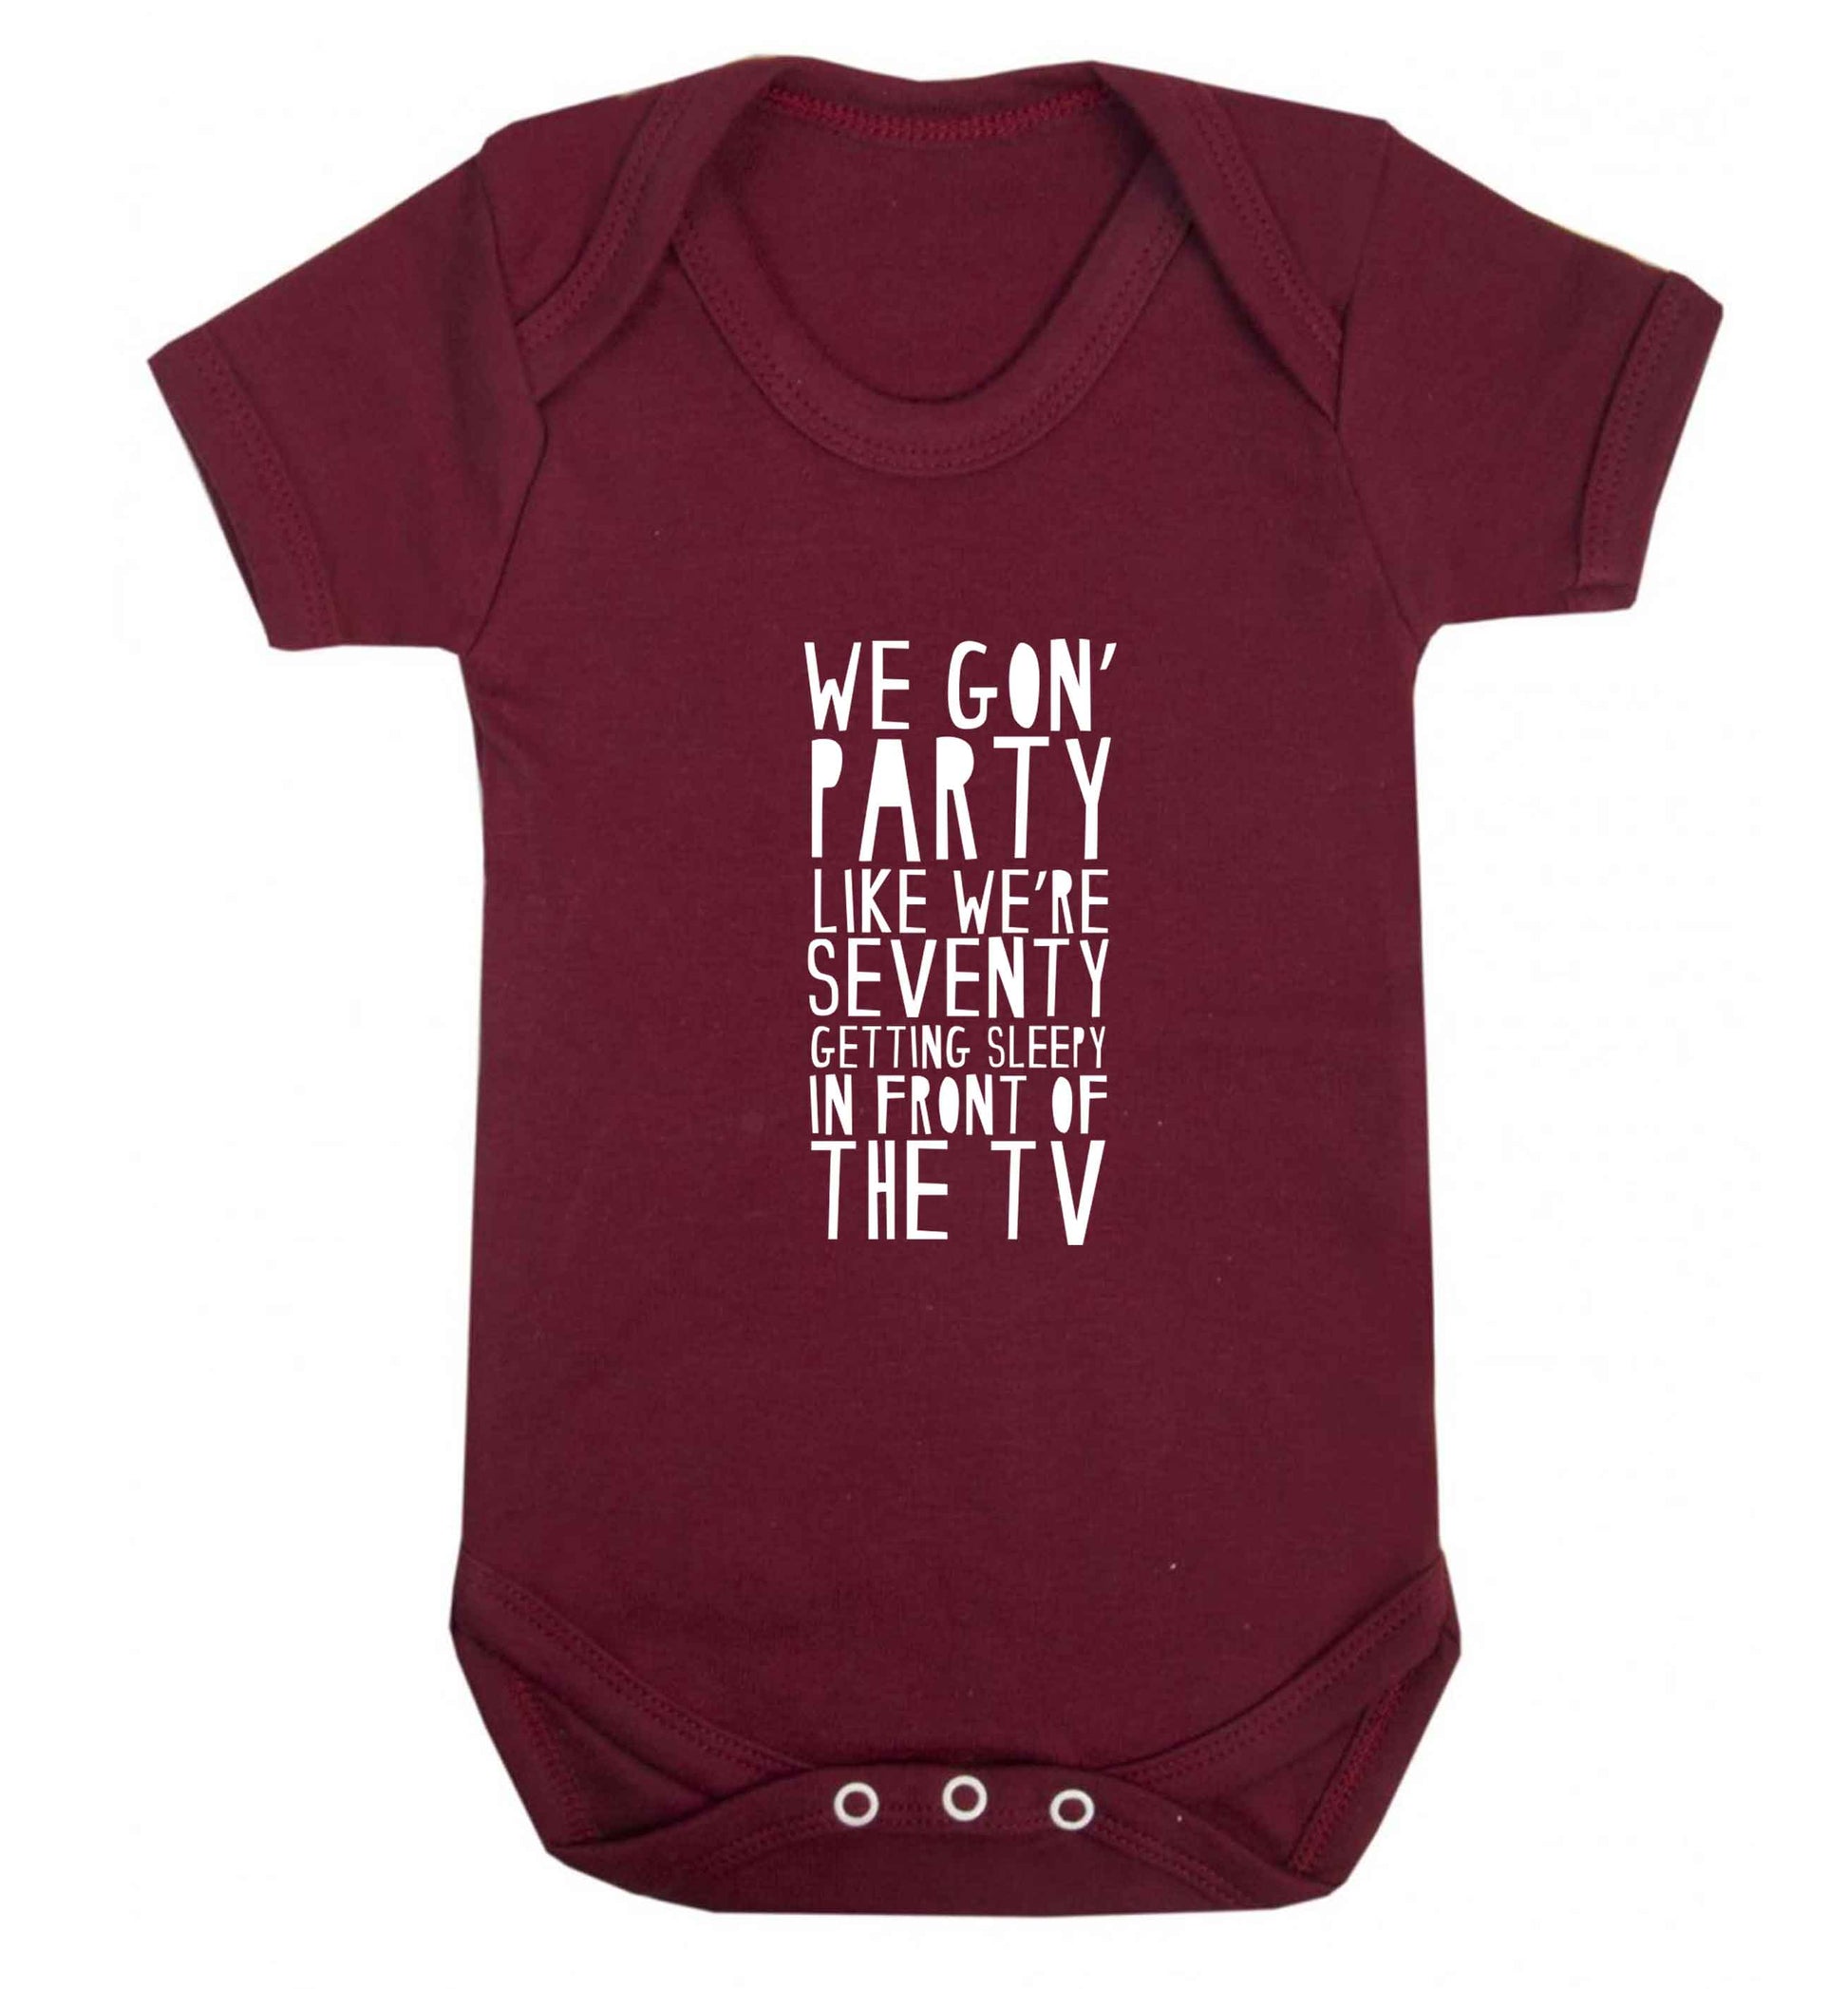 We gon' party like we're seventy getting sleepy in front of the TV baby vest maroon 18-24 months